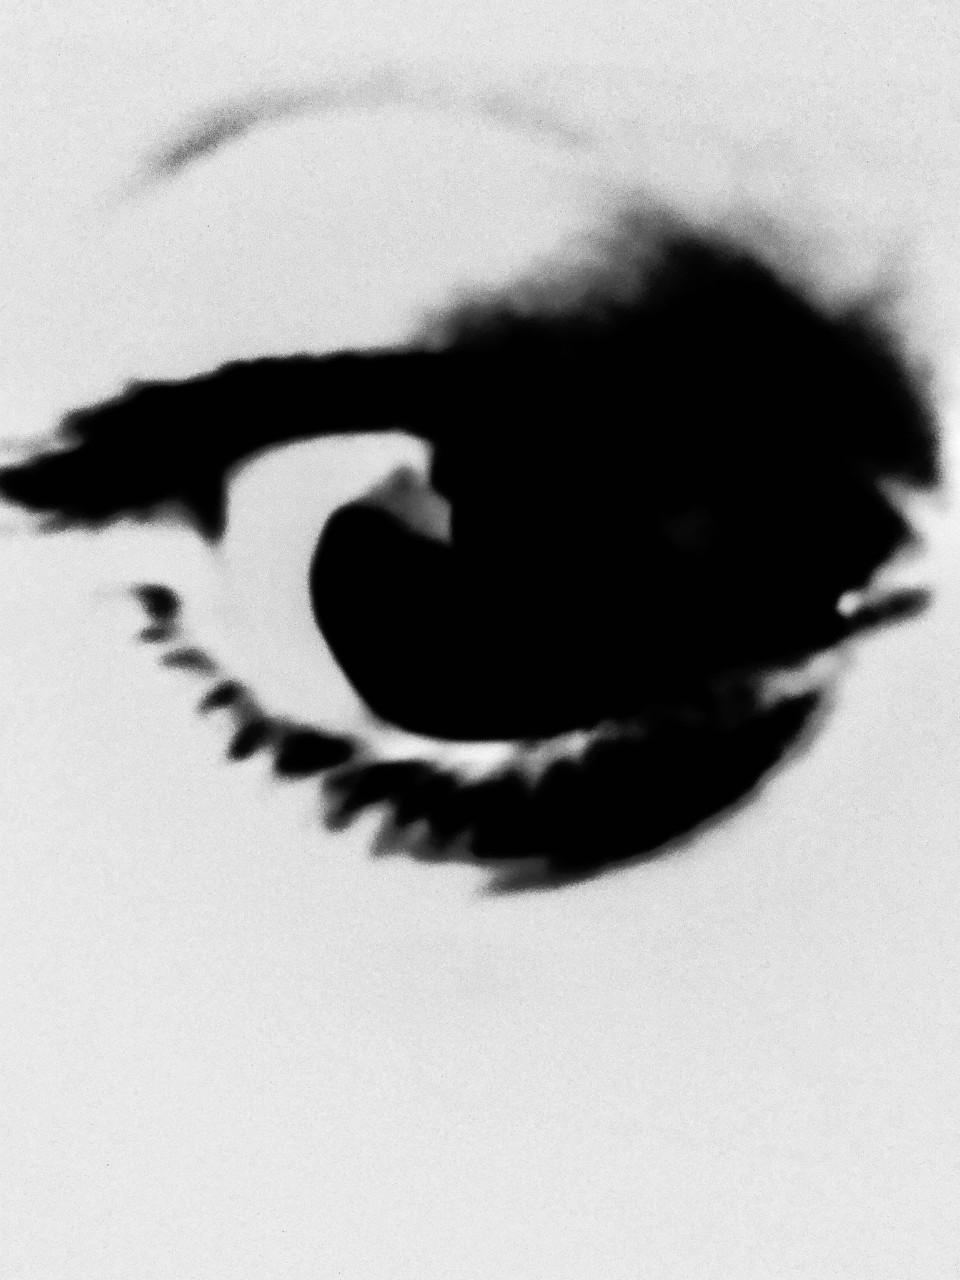 The artwork is a black and white photo, what appears to be an extreme close up of a single eye. The eye is perhaps wearing makeup – you can see the eyelashes and iris of the eye, but the photo has a blurry and unreal quality to it.